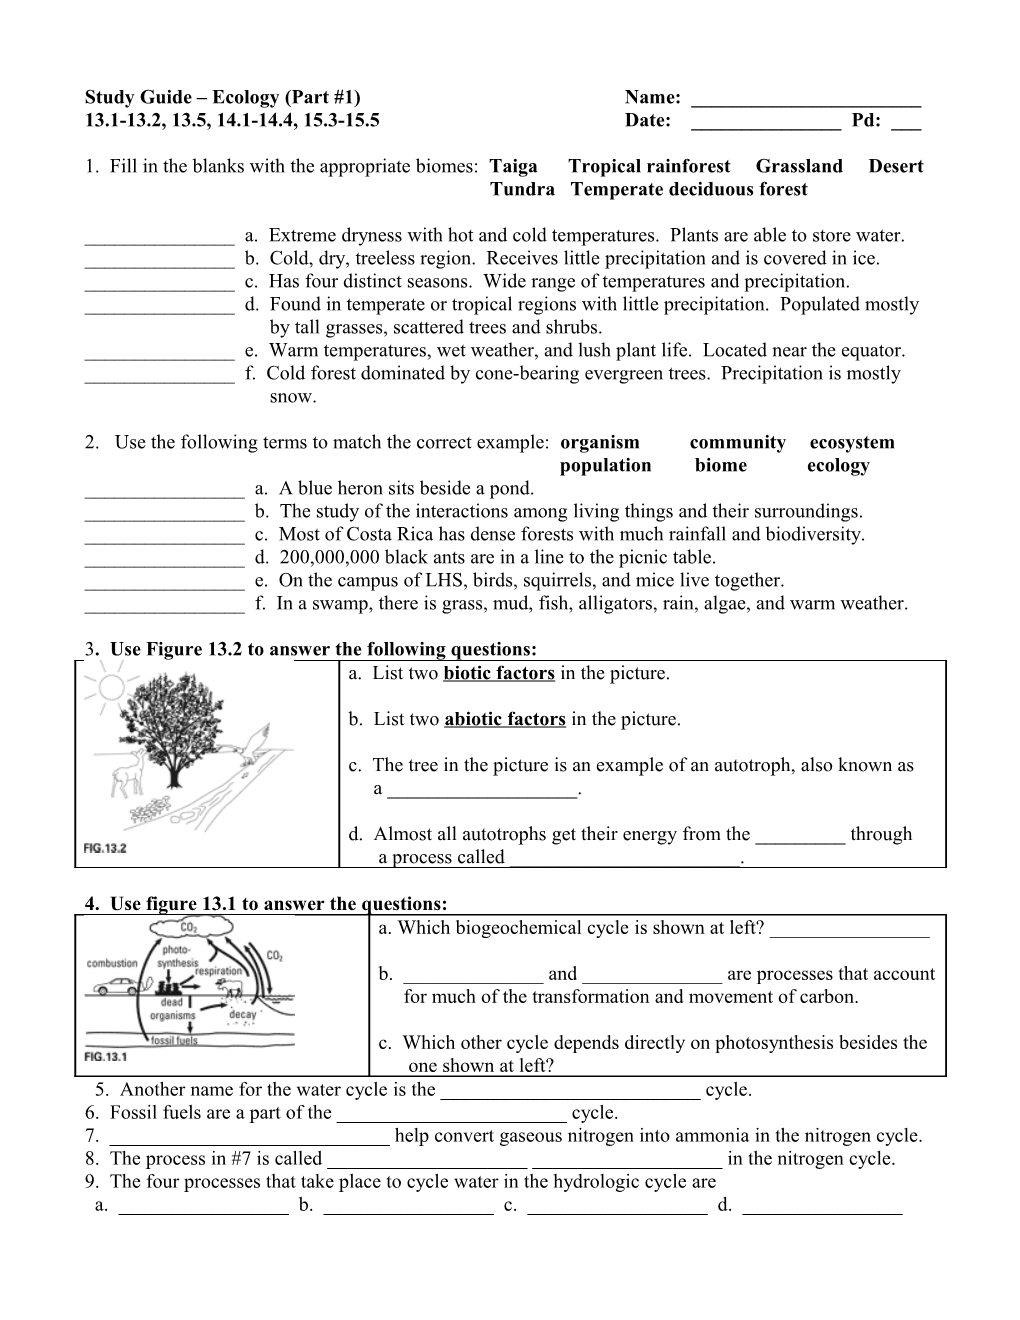 Study Guide Ecology (Part #1)